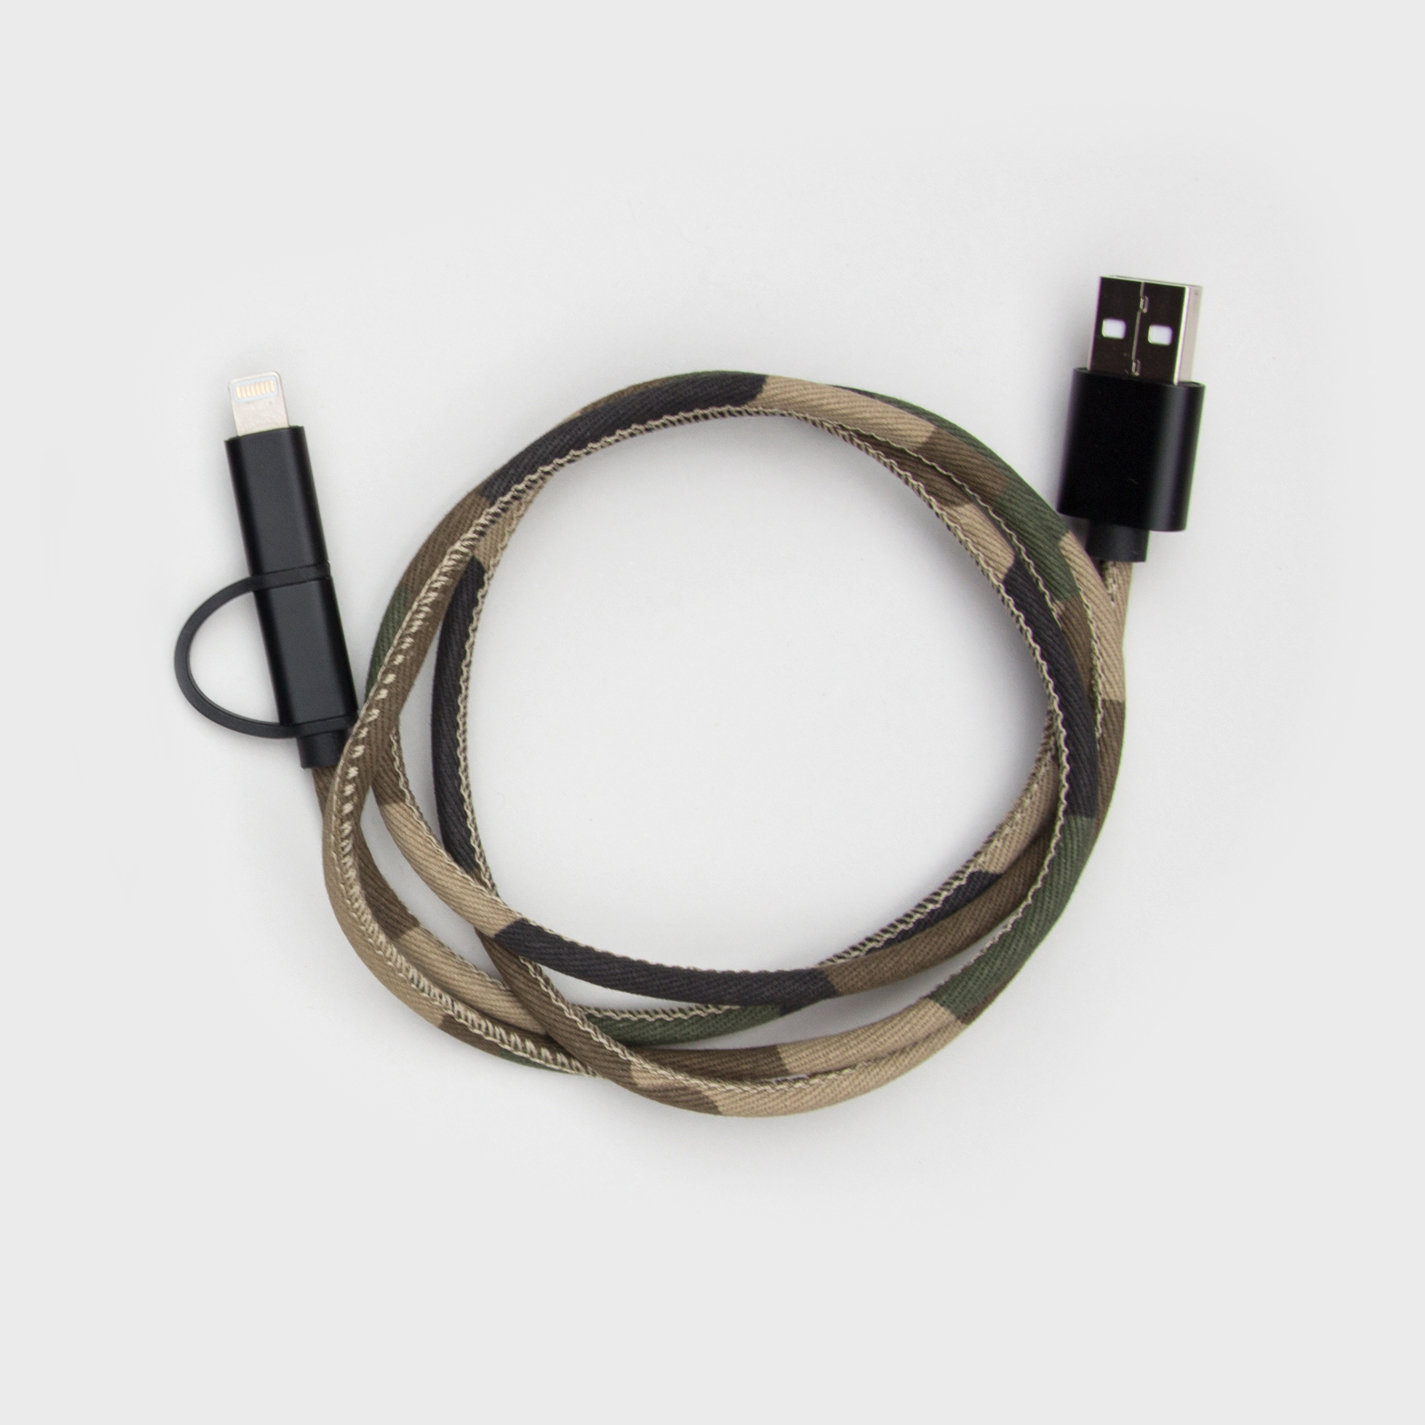 USB phone charger in camo design